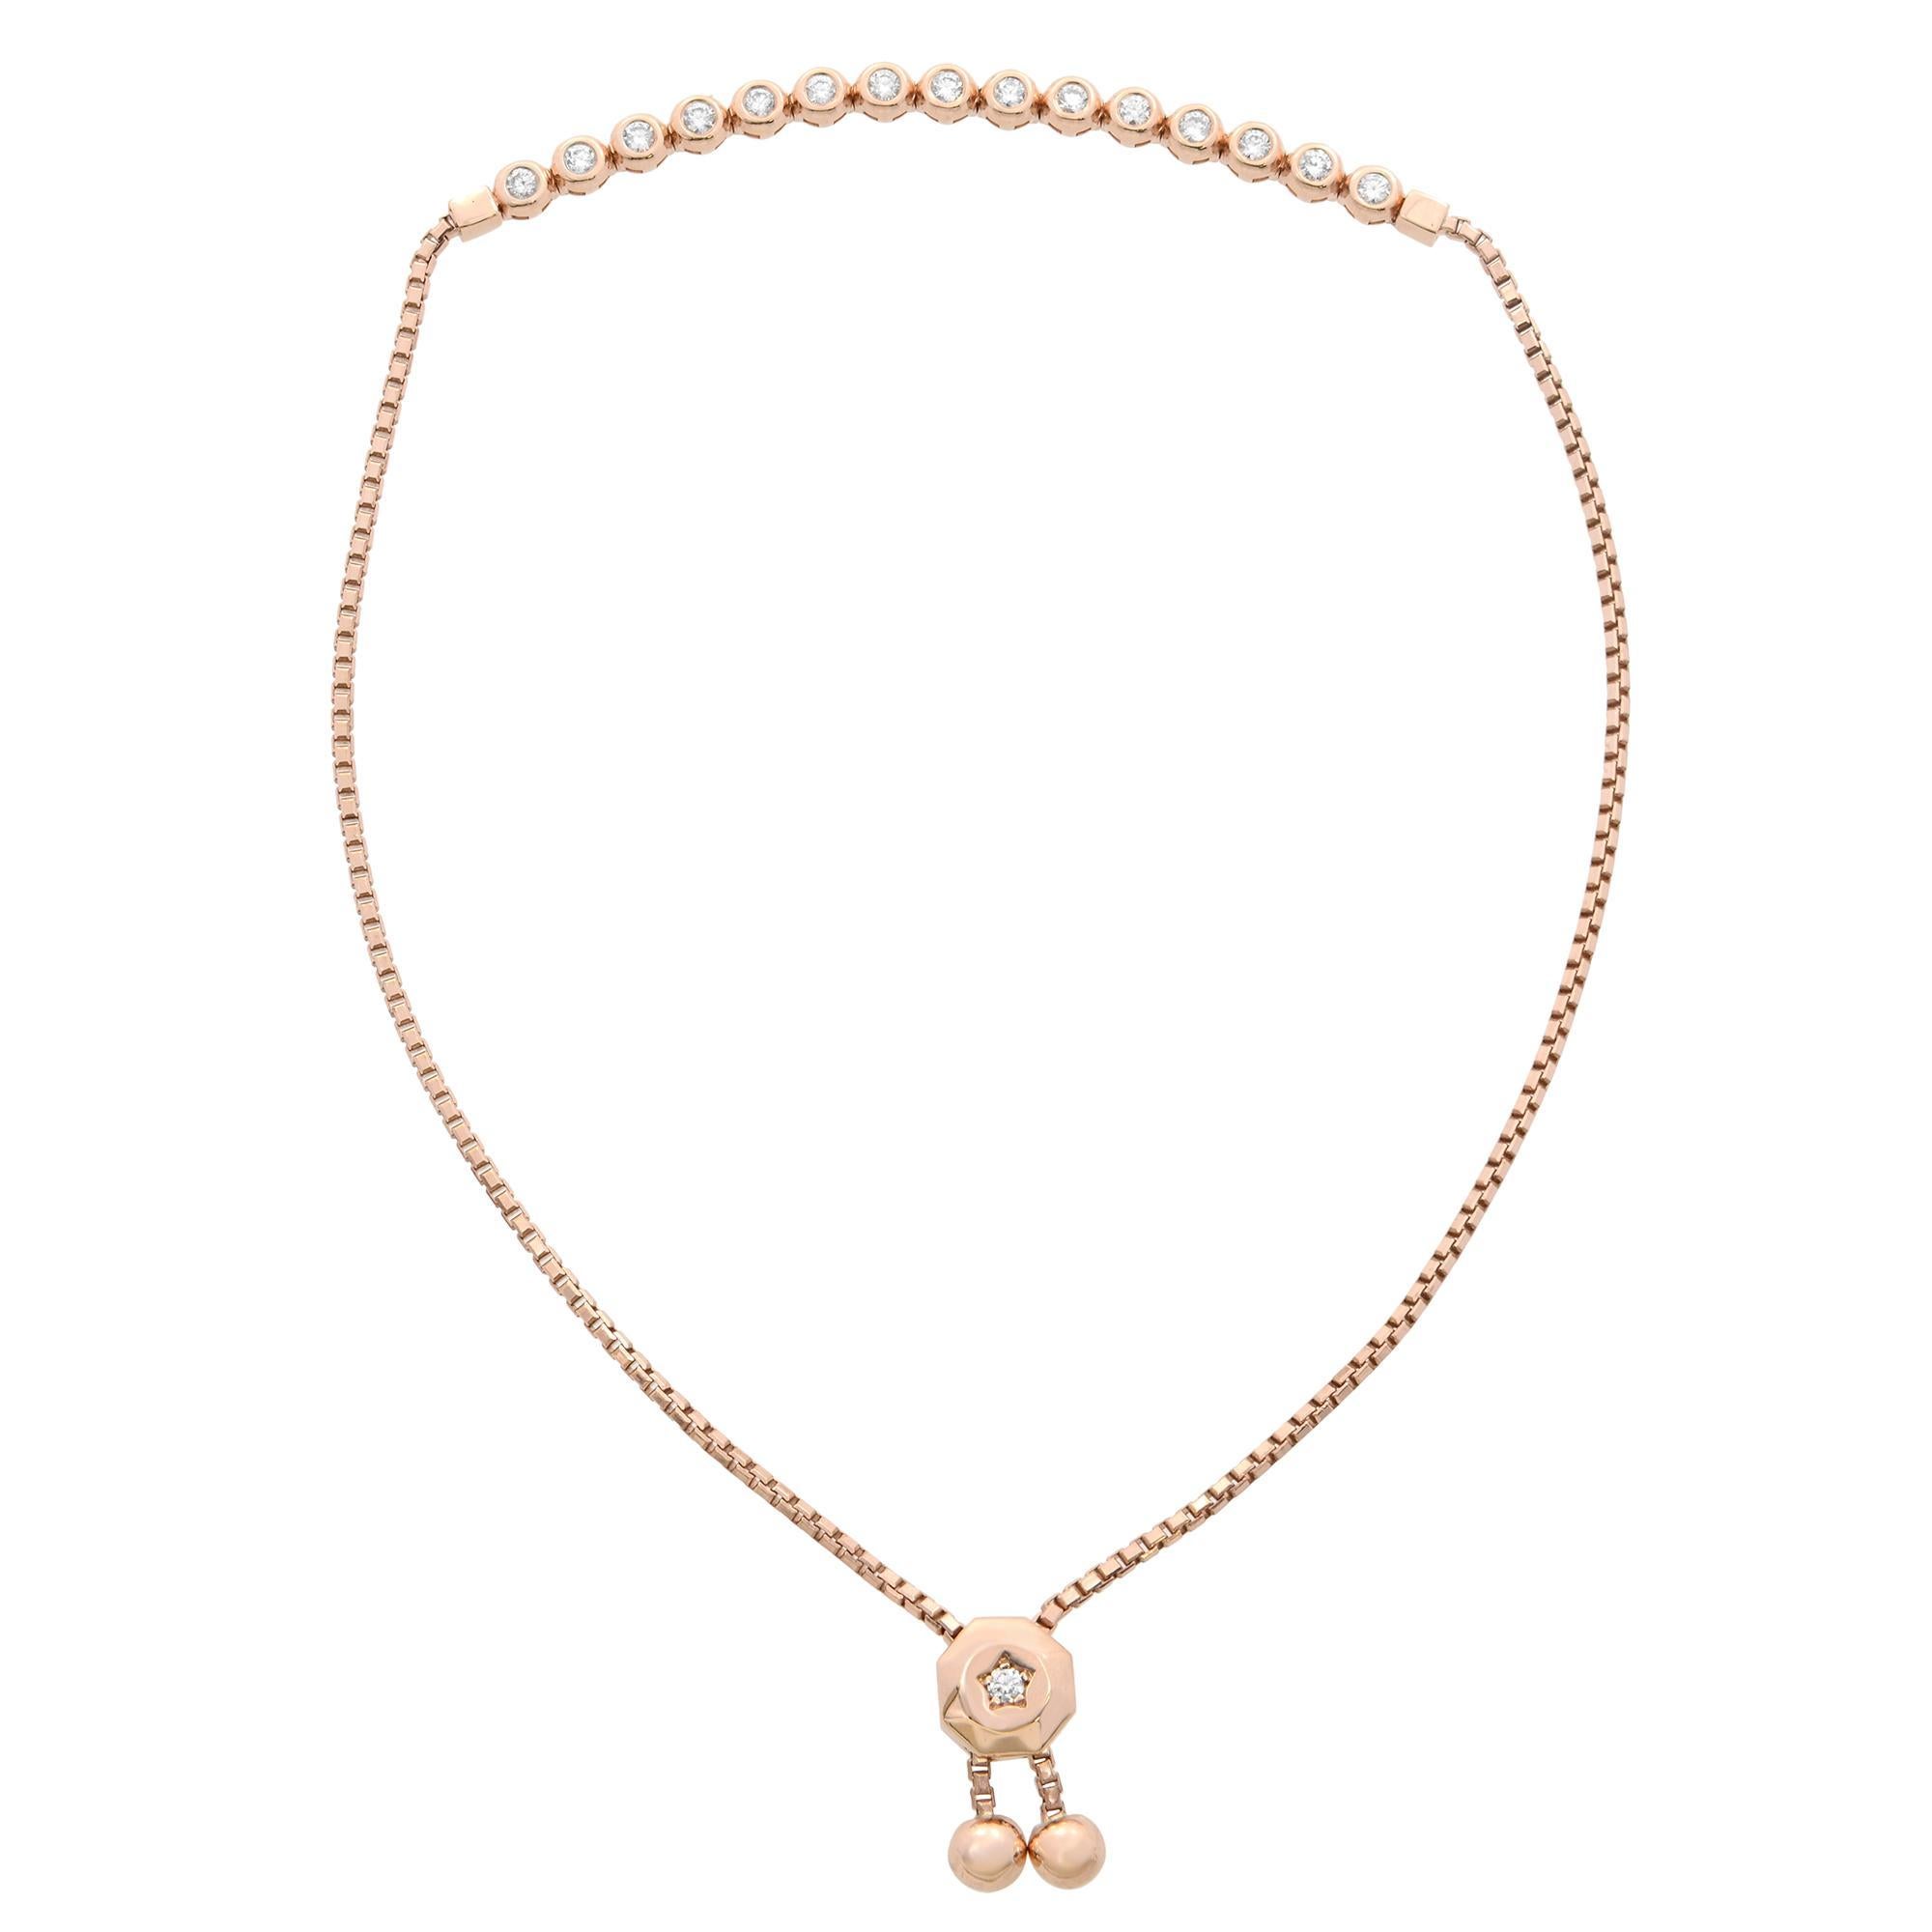 Trendy diamond tennis bolo bracelet with a sliding lariat closure on a delicate box chain. Super comfortable, so easy to wear! The design is shimmered with 17 round brilliant cut diamonds totaling 0.48 carats. The bracelet is made of fine 14K Rose